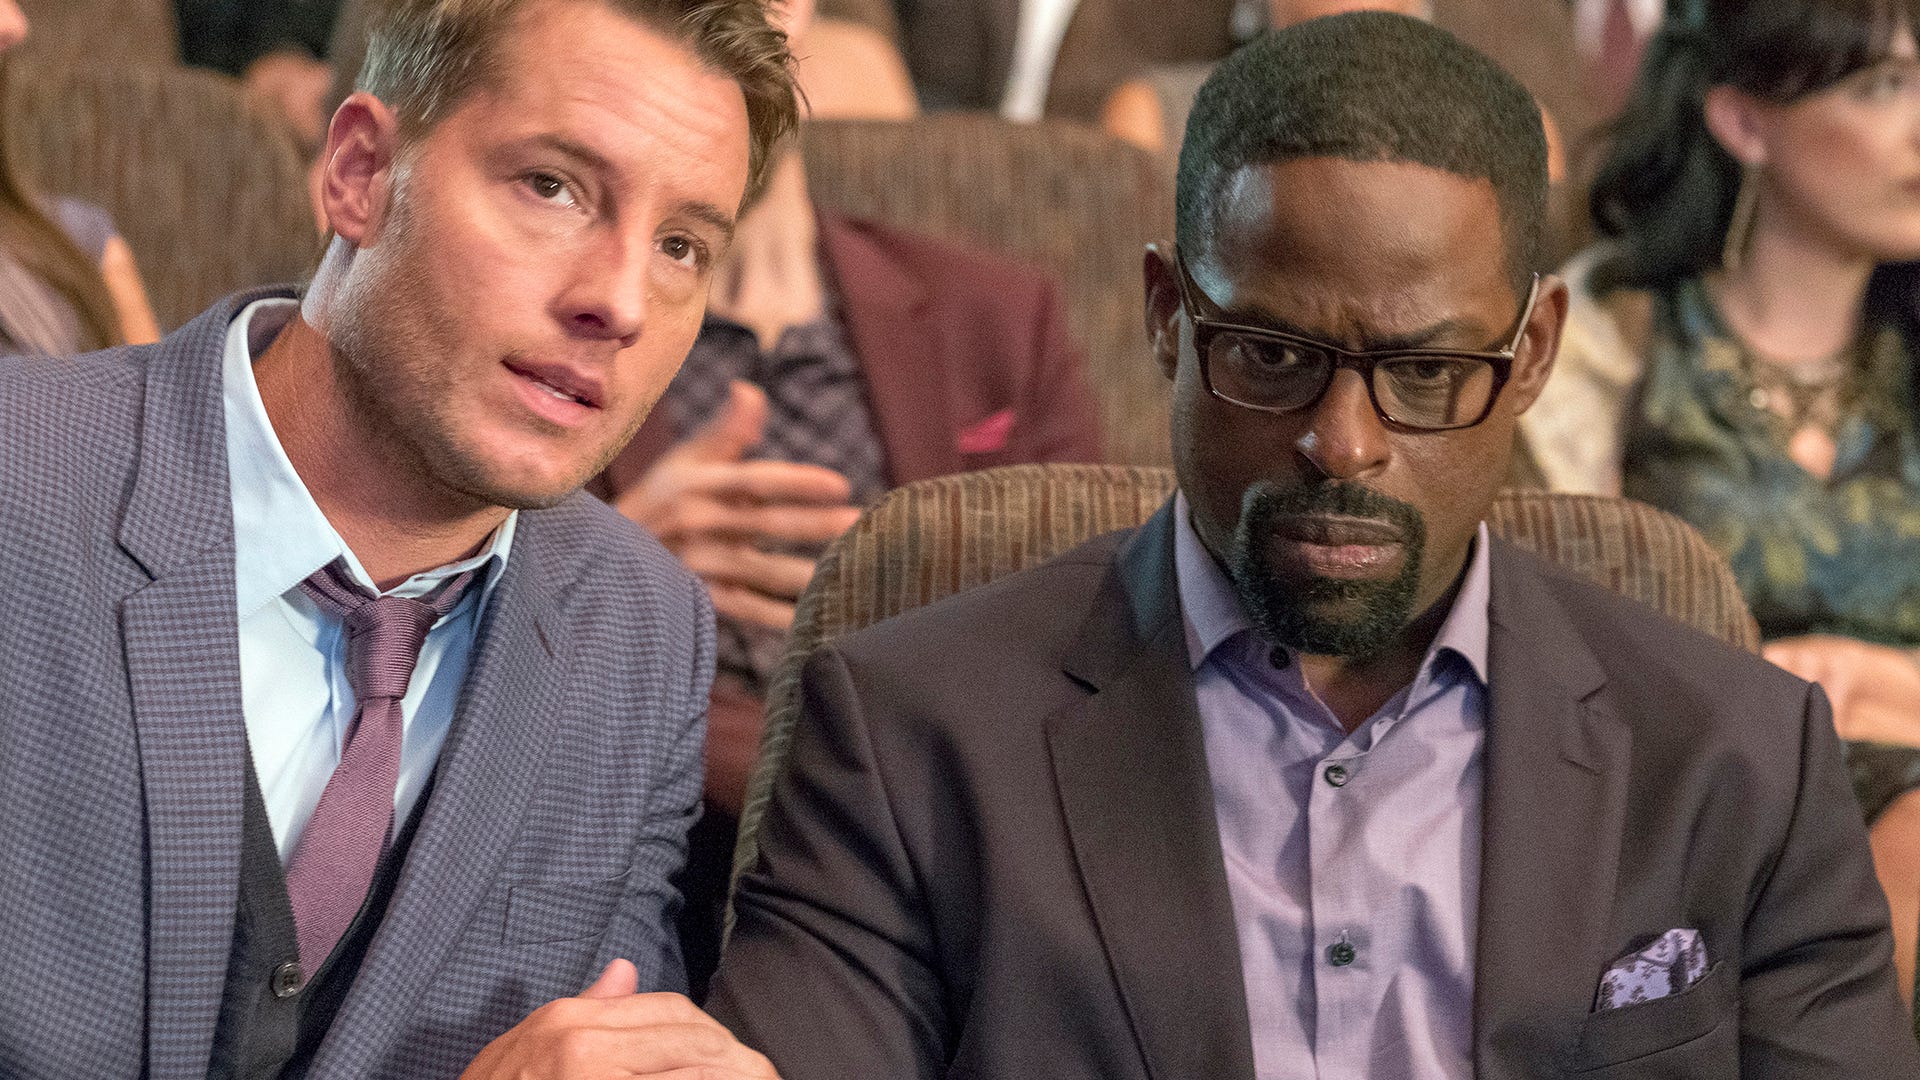 Justin Hartley and Sterling K. Brown, This Is Us​